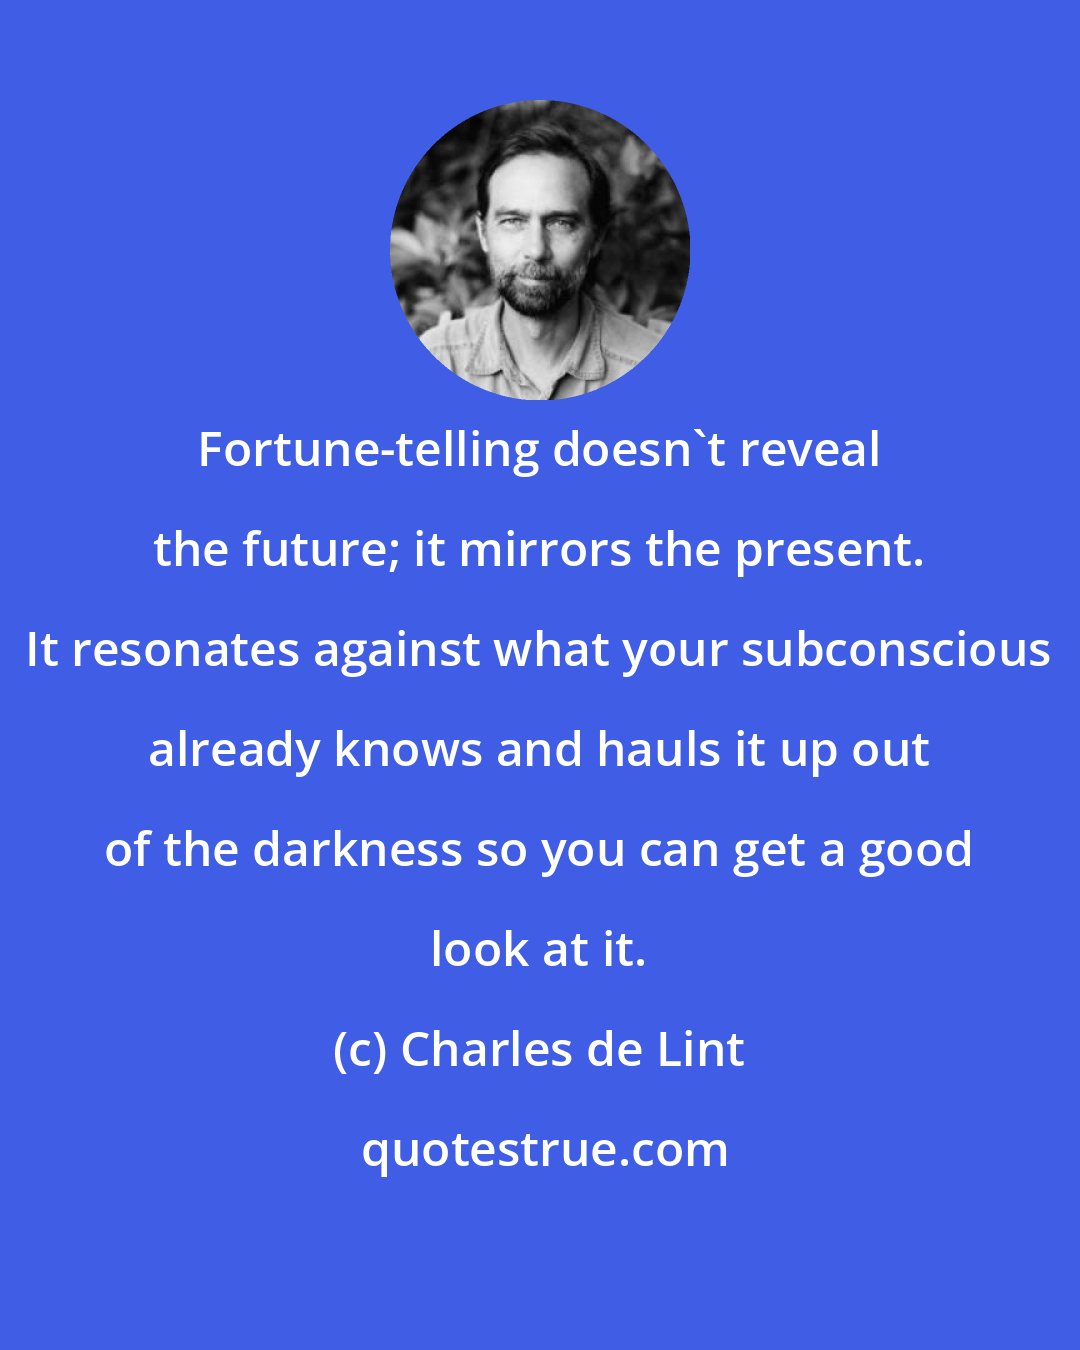 Charles de Lint: Fortune-telling doesn't reveal the future; it mirrors the present. It resonates against what your subconscious already knows and hauls it up out of the darkness so you can get a good look at it.